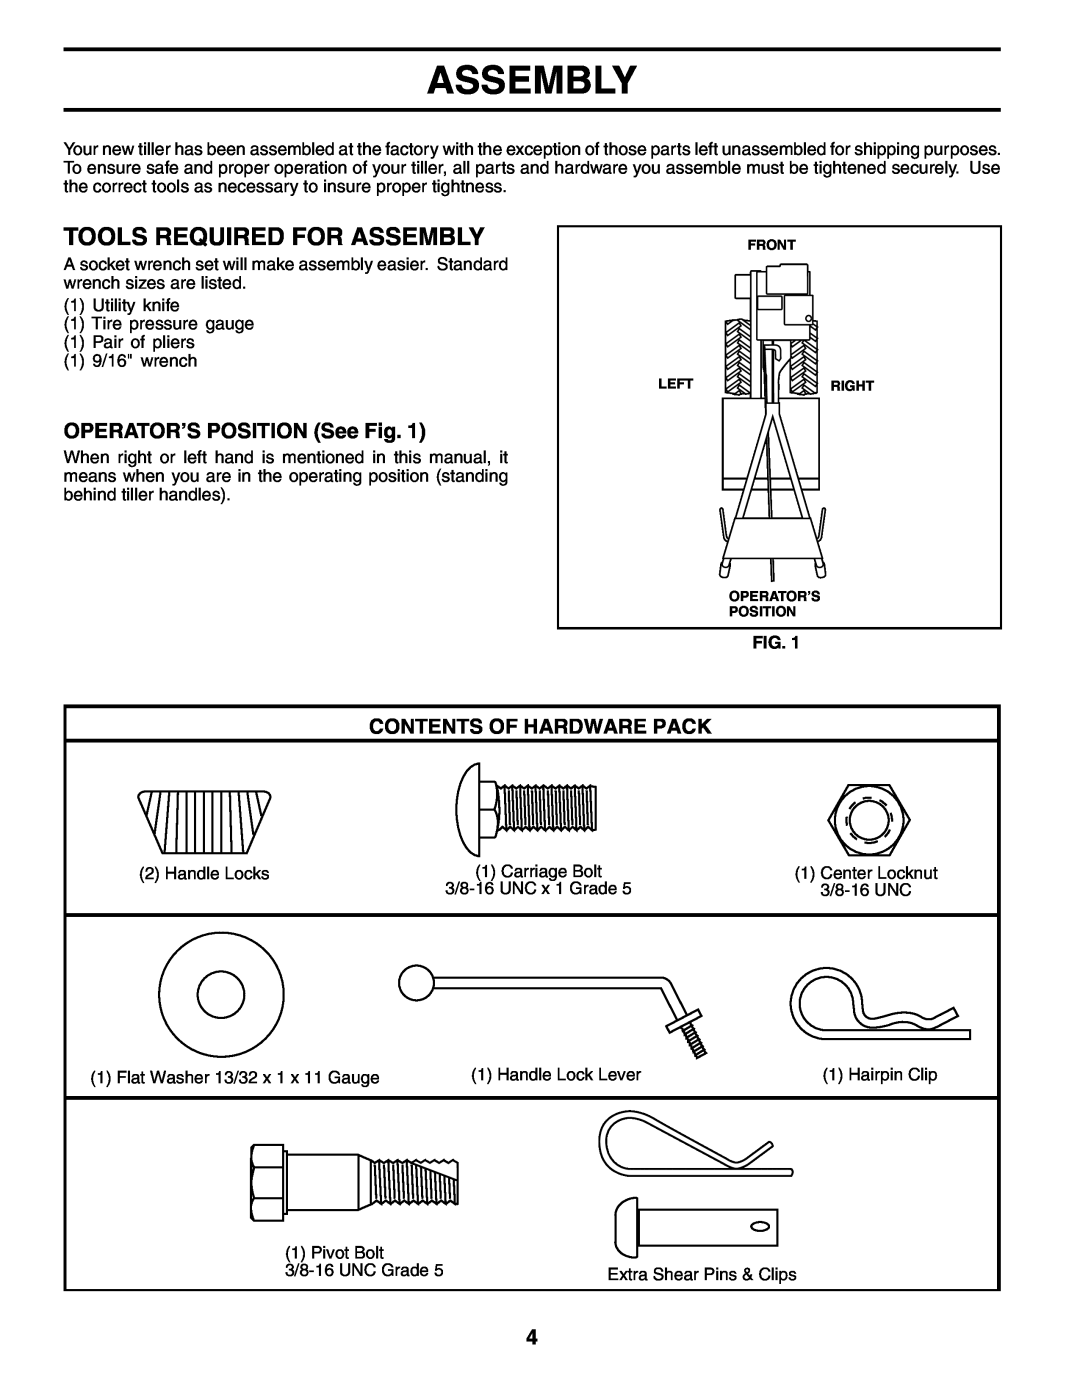 Poulan MRT500 owner manual Tools Required For Assembly, OPERATOR’S POSITION See Fig, Contents Of Hardware Pack 